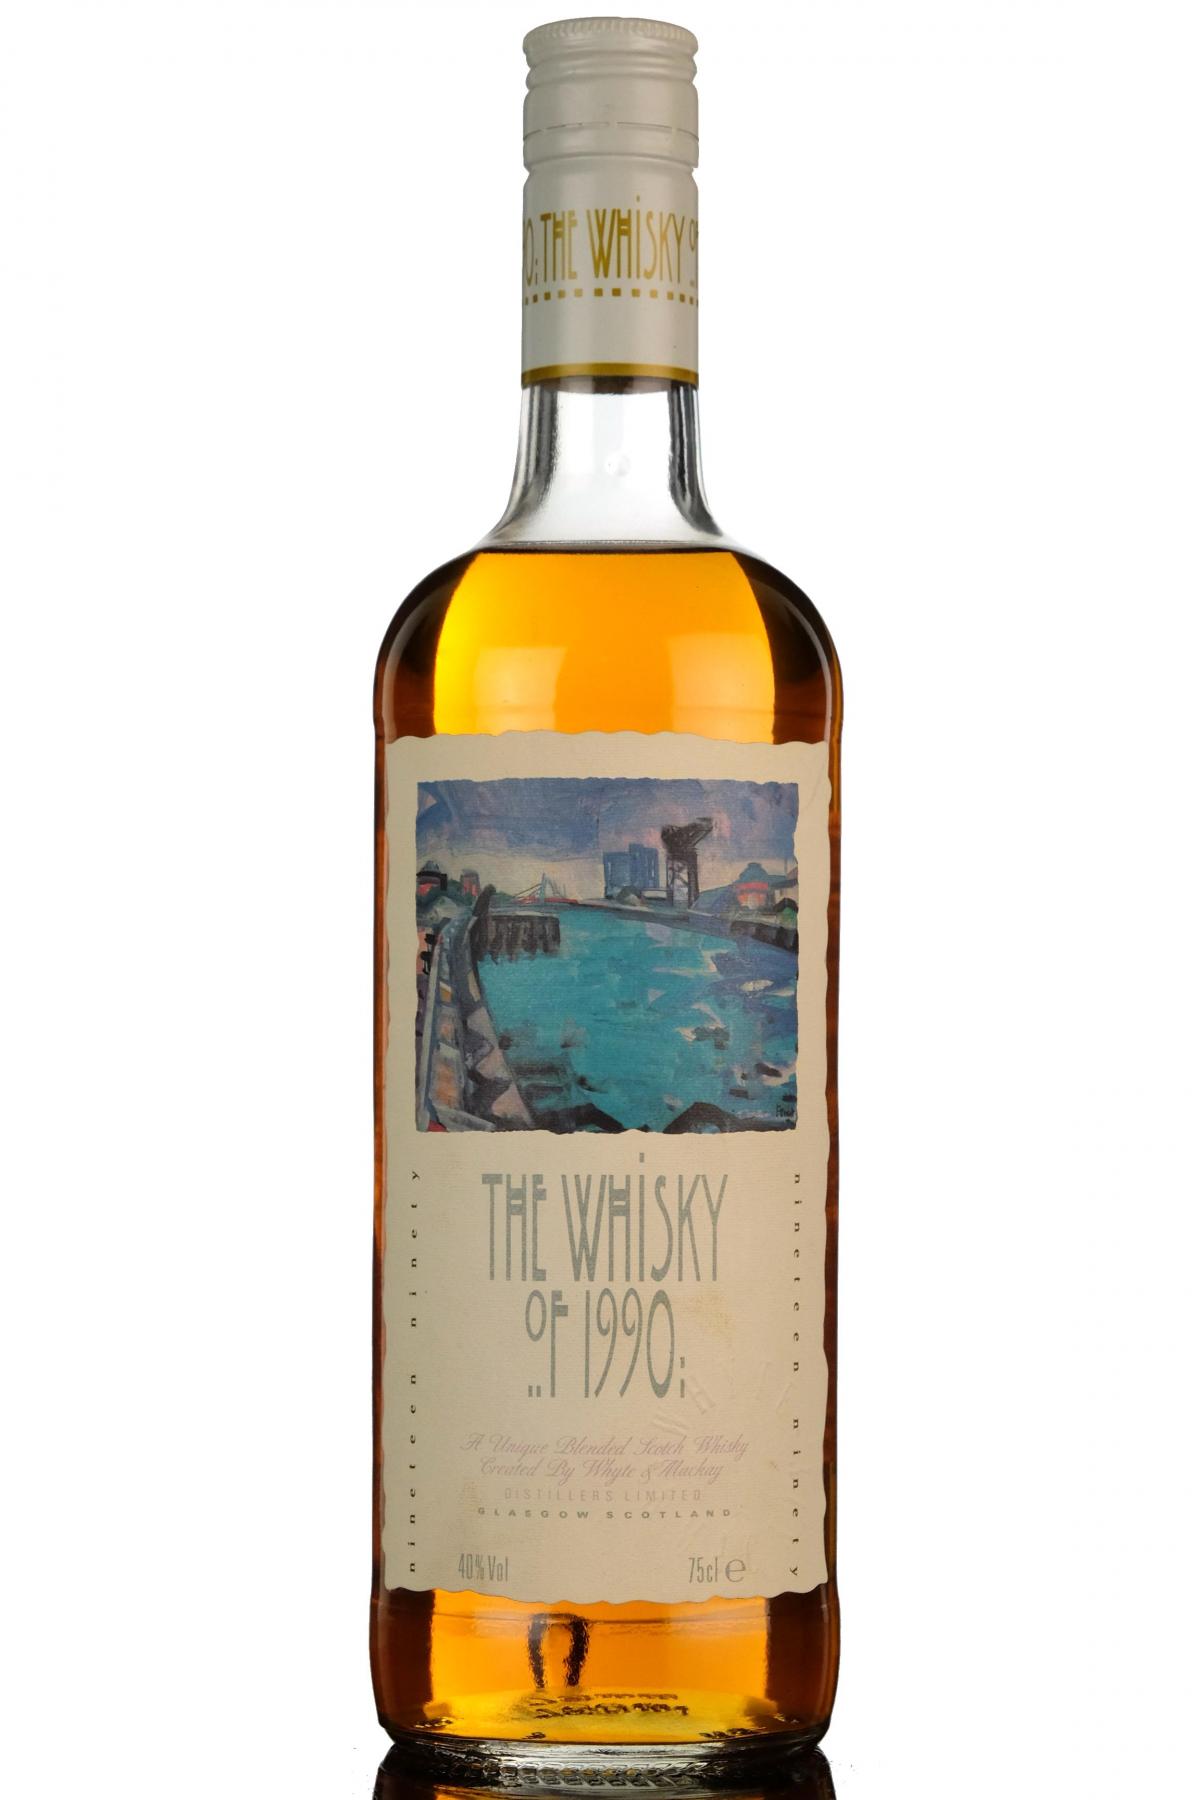 The Whisky Of 1990